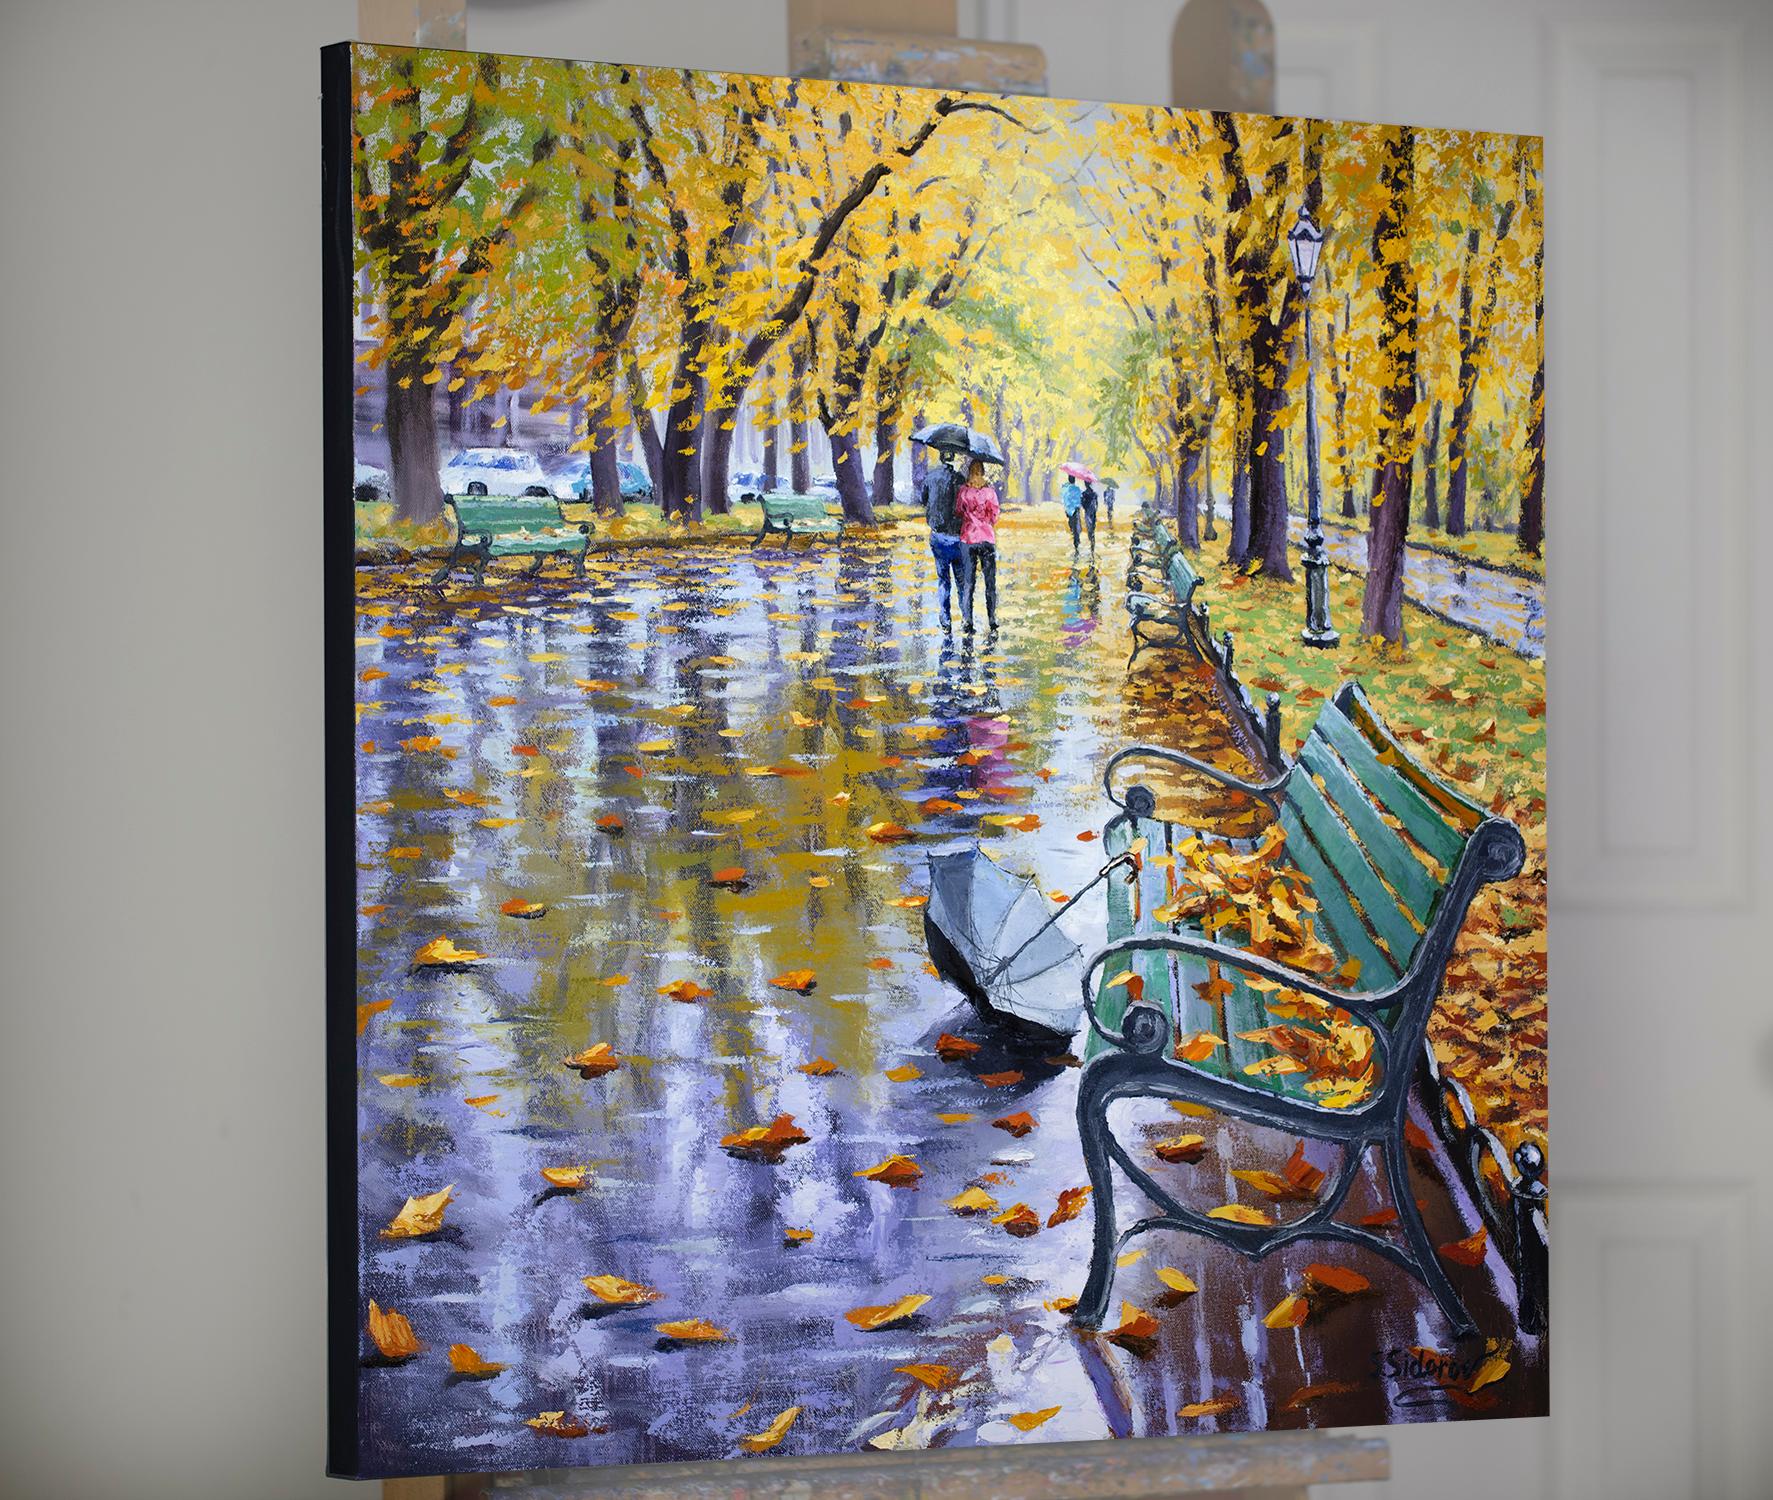 Missing Umbrella - Abstract Impressionist Painting by Stanislav Sidorov